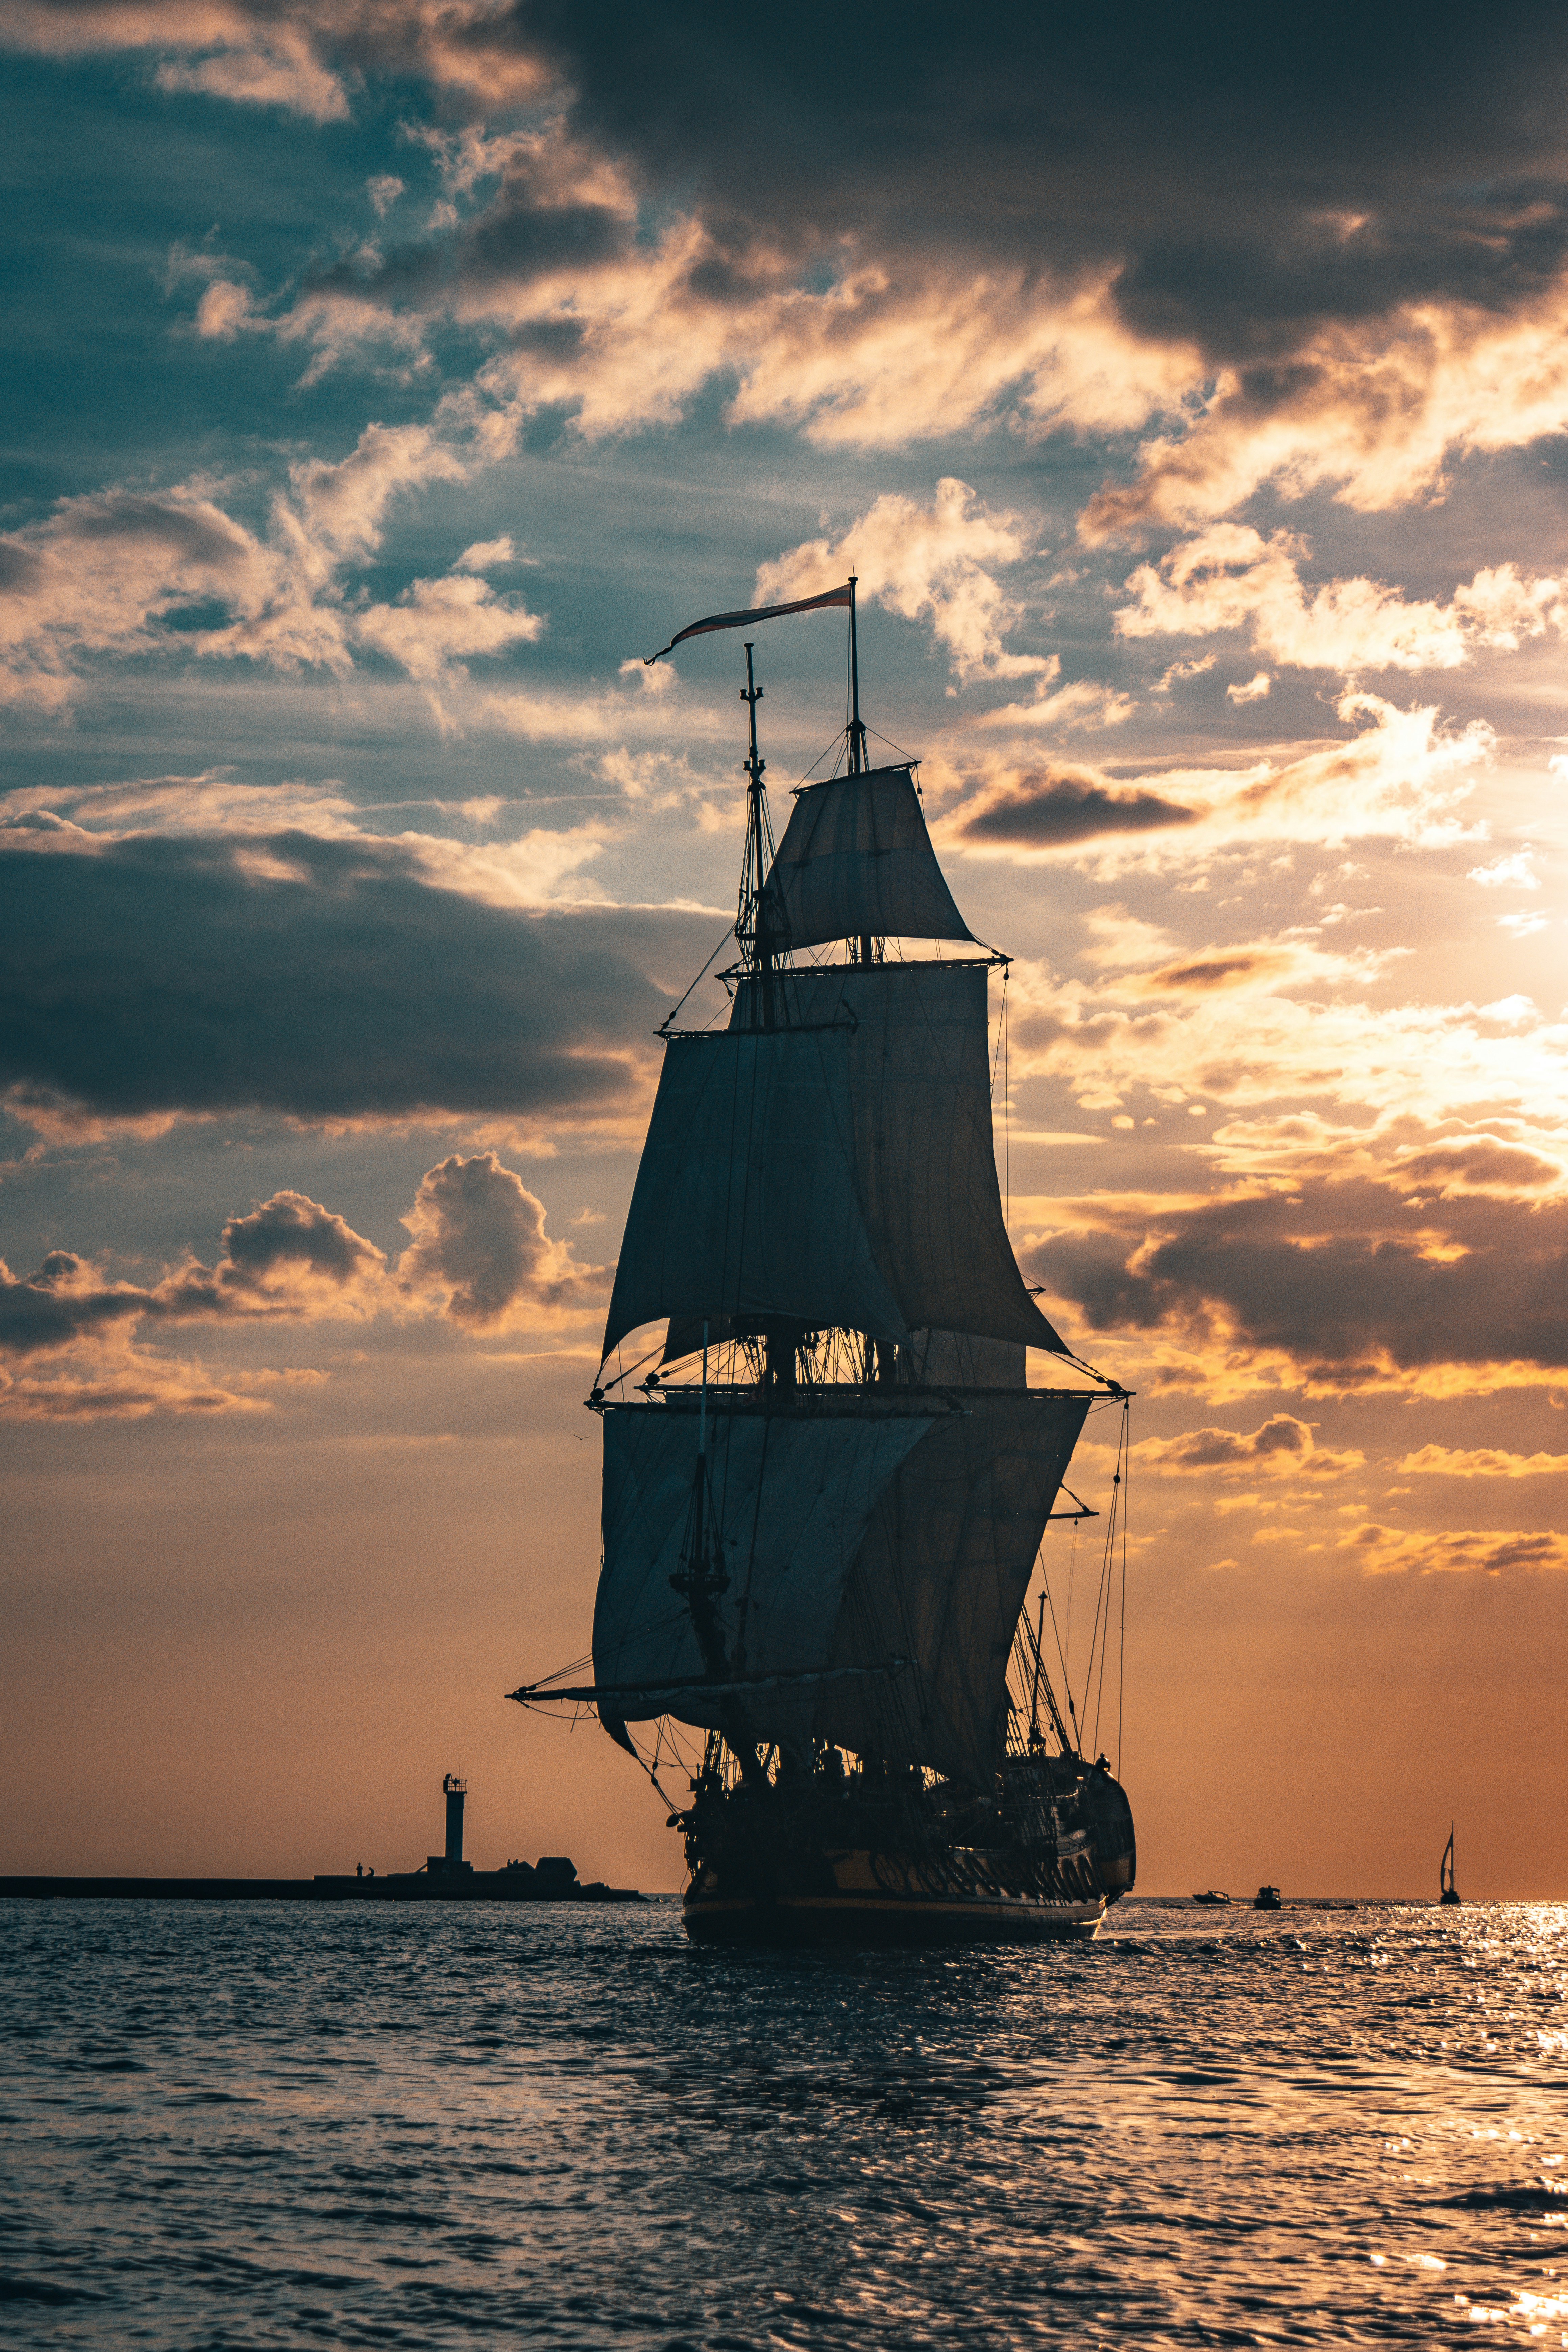 The Frigate Shtandart is the exact replica of the man-of-war built by Peter the Great in 1703 in order to defend Saint Petersburg. Sunset time in Riga Latvia